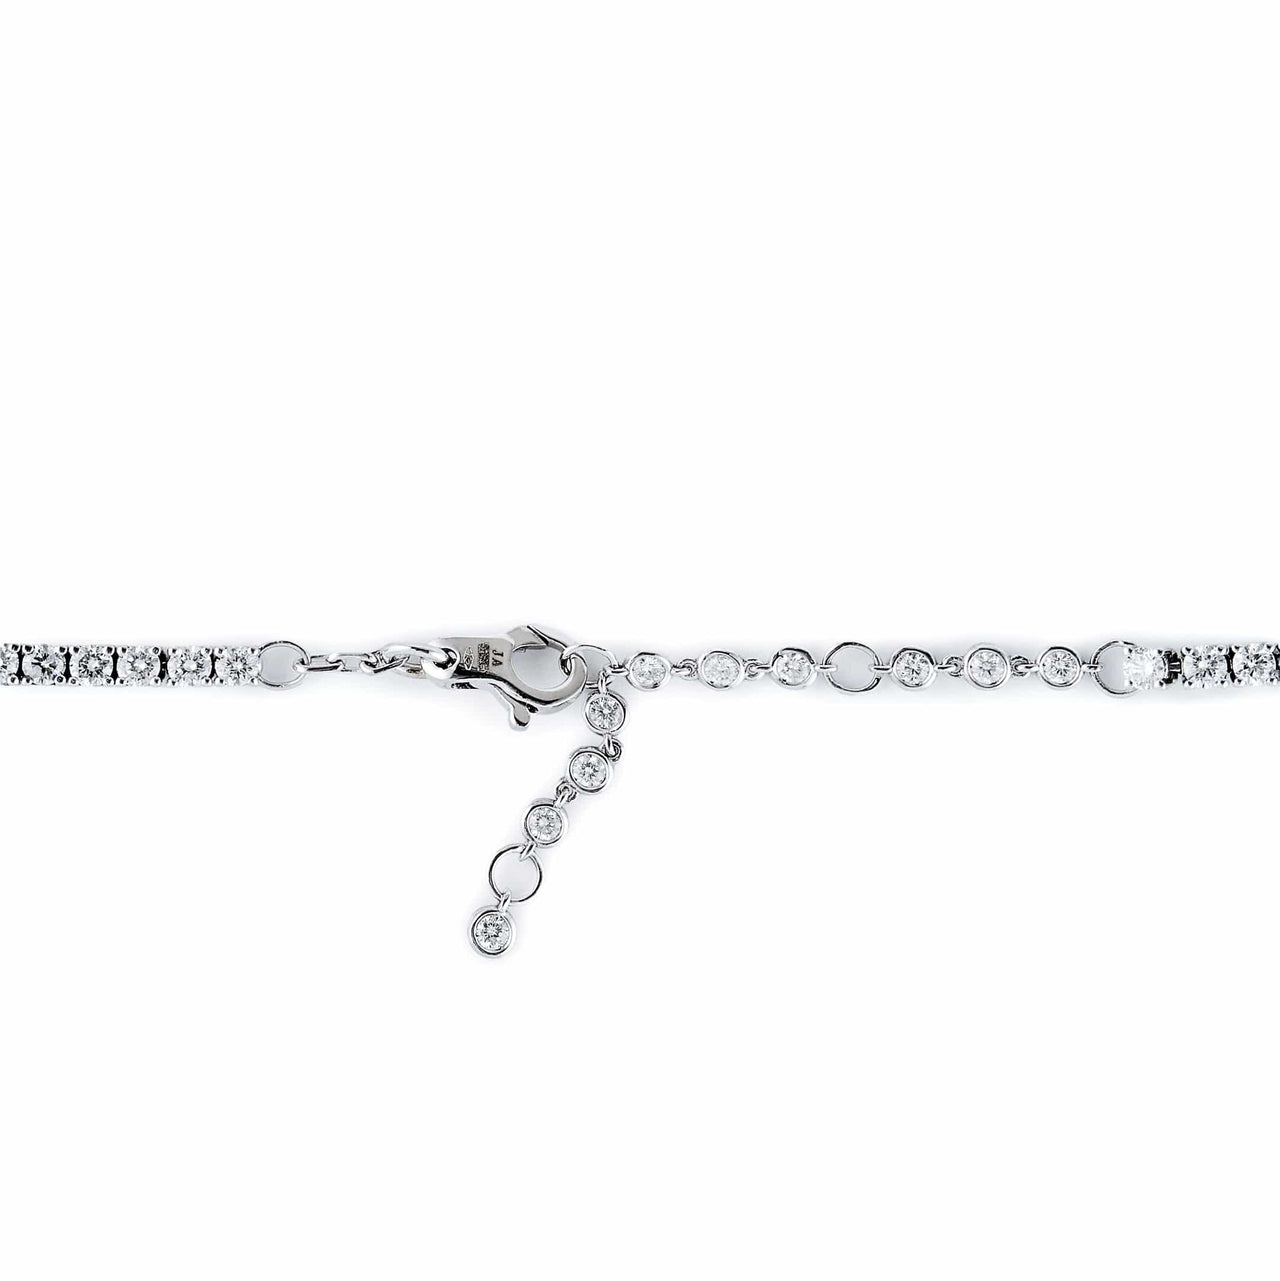 Not Your Average Diamond Tennis Necklace with Sapphire